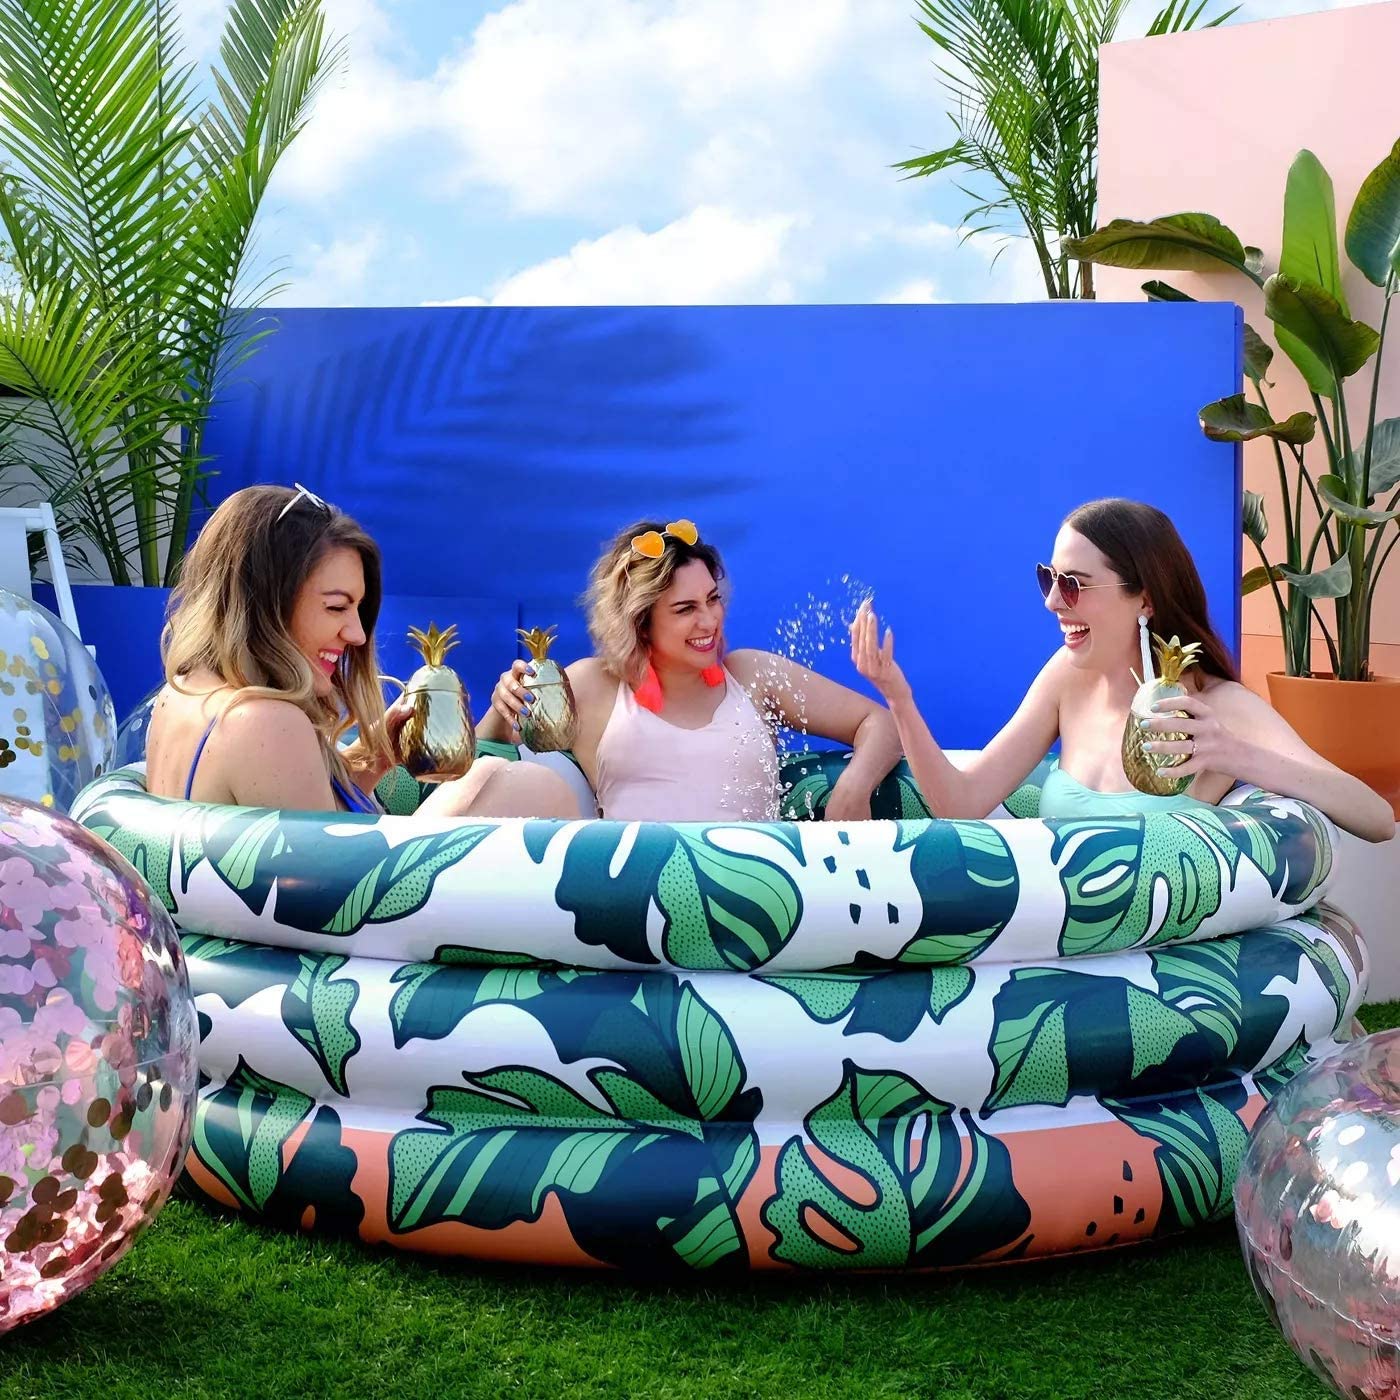 The Influence of Inflatable Pools in Popular Culture